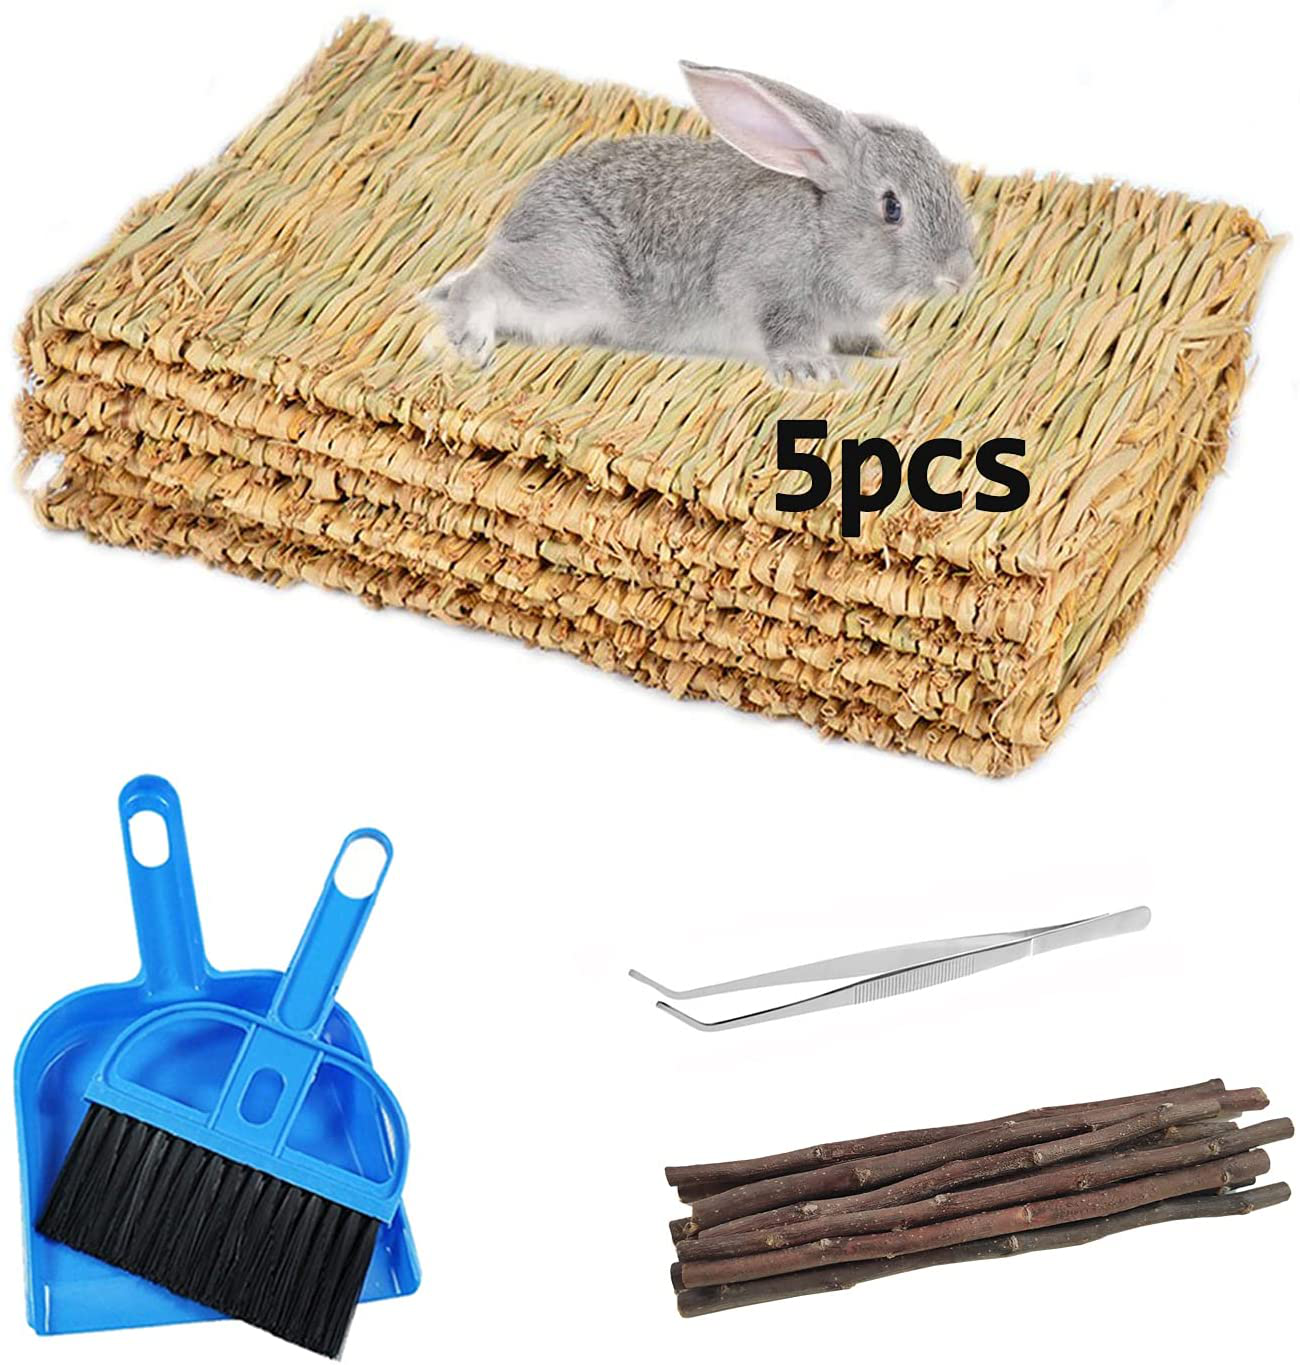 Kathson 5 Pack Bunny Grass Mats Woven Rabbit Bed Mat Bedding Nest Chew Toy Natural Straw Bed Play Toys for Guinea Pig Hamster Chinchilla Parrot